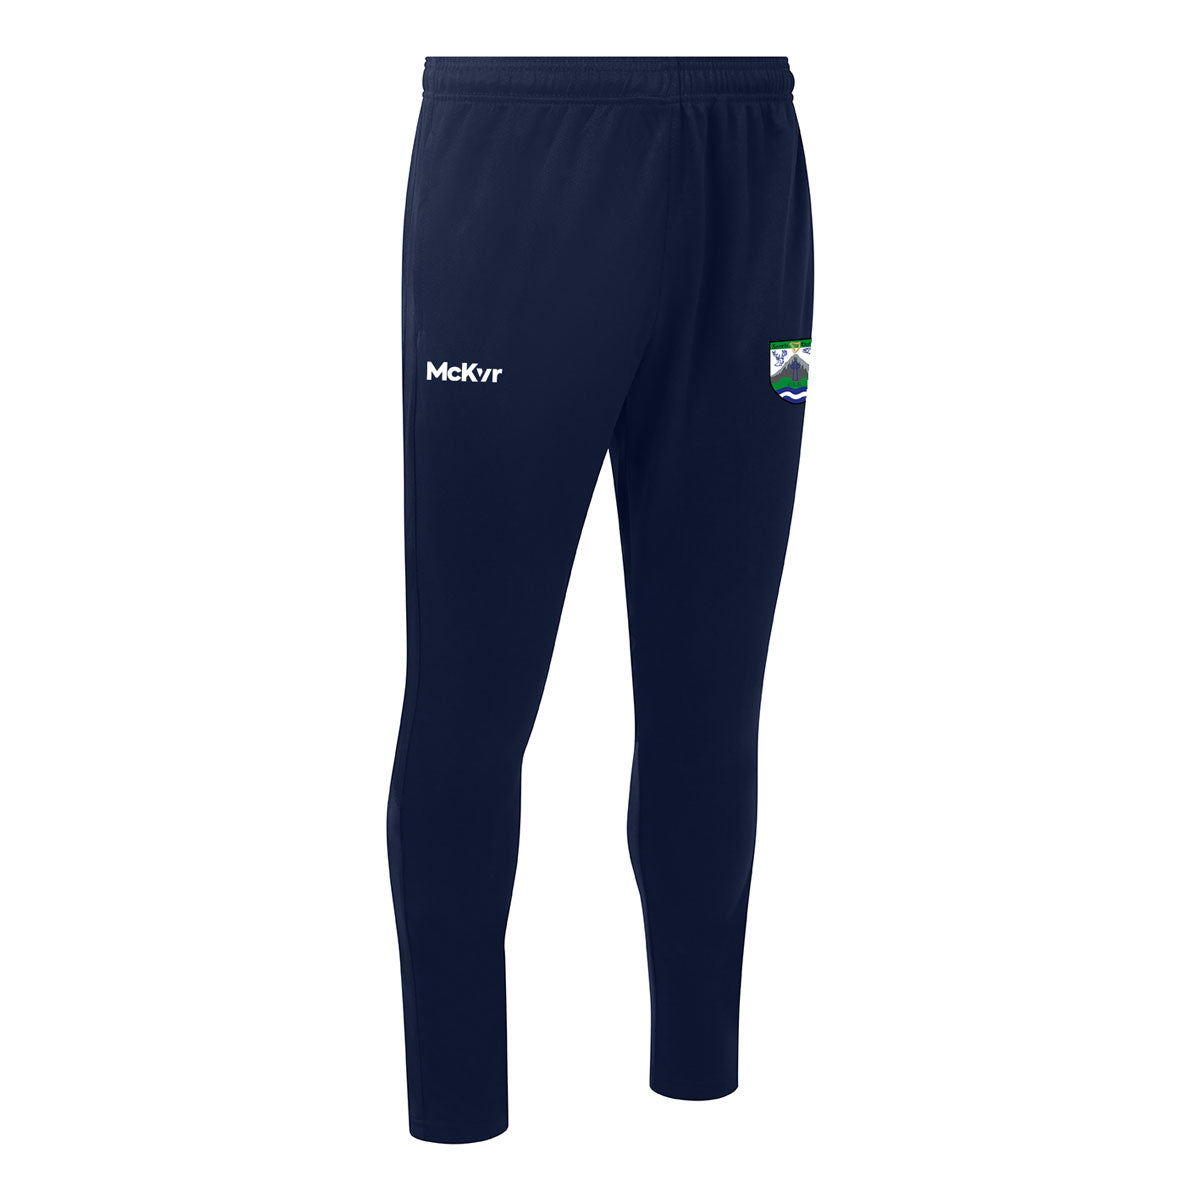 Mc Keever CLG Ghaoth Dobhair Core 22 Skinny Pants - Youth - Navy